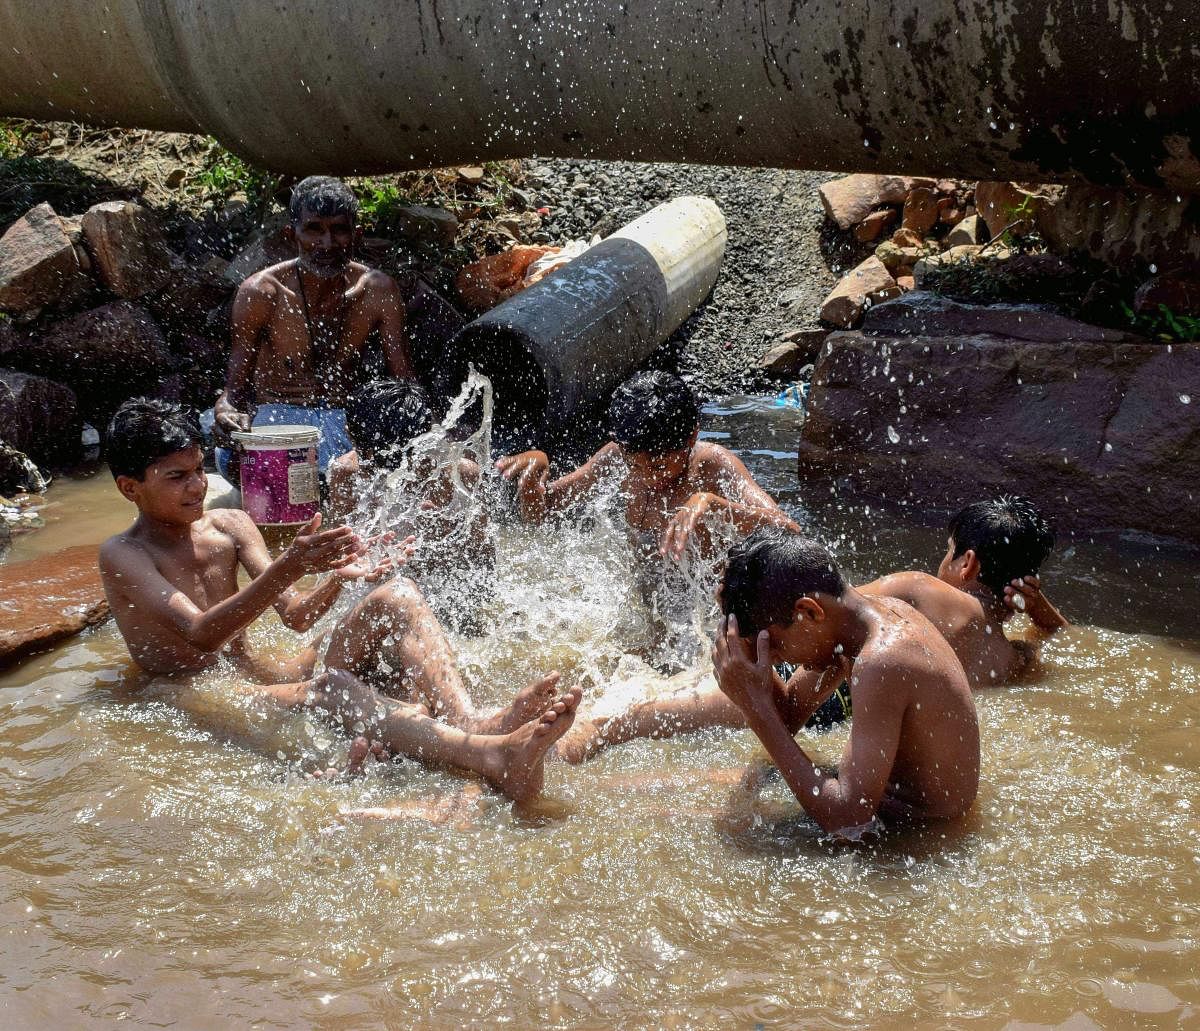 Bhopal: Children play in a pond on a hot summer afternoon, in Bhopal on Wednesday, May 30, 2018. (PTI Photo)